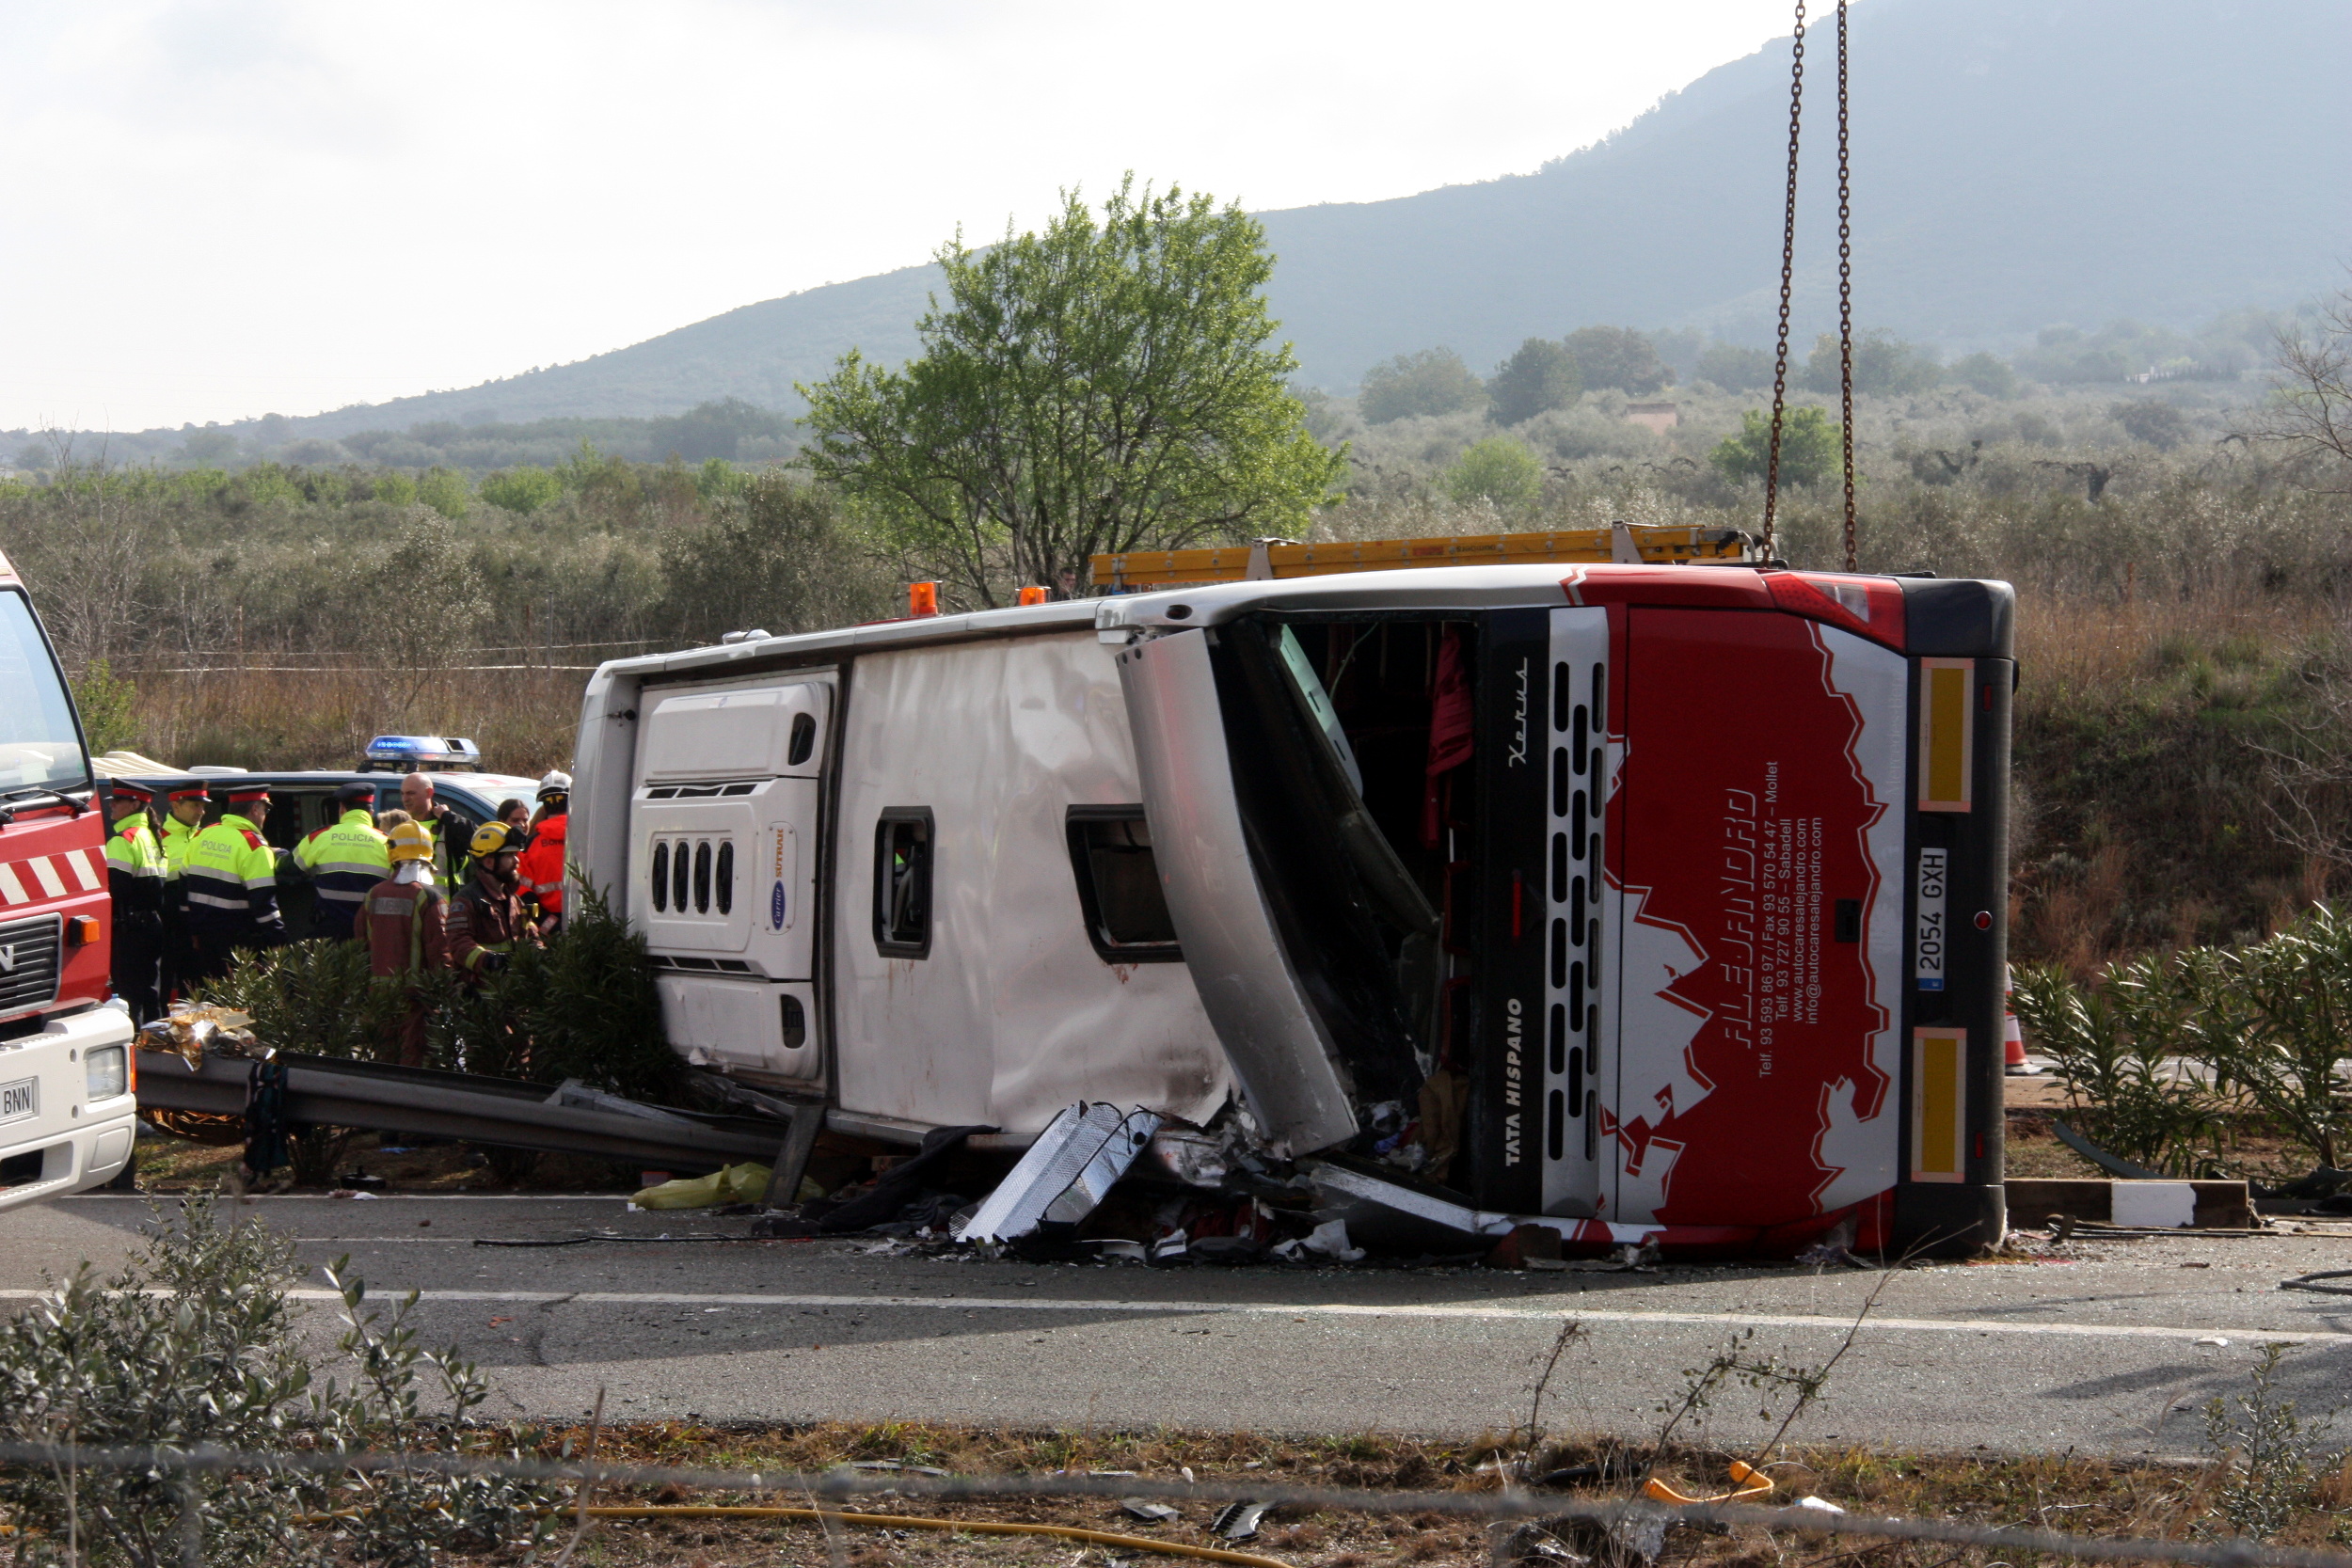 The coach overturned after hitting a car travelling in the opposite direction (by ACN)